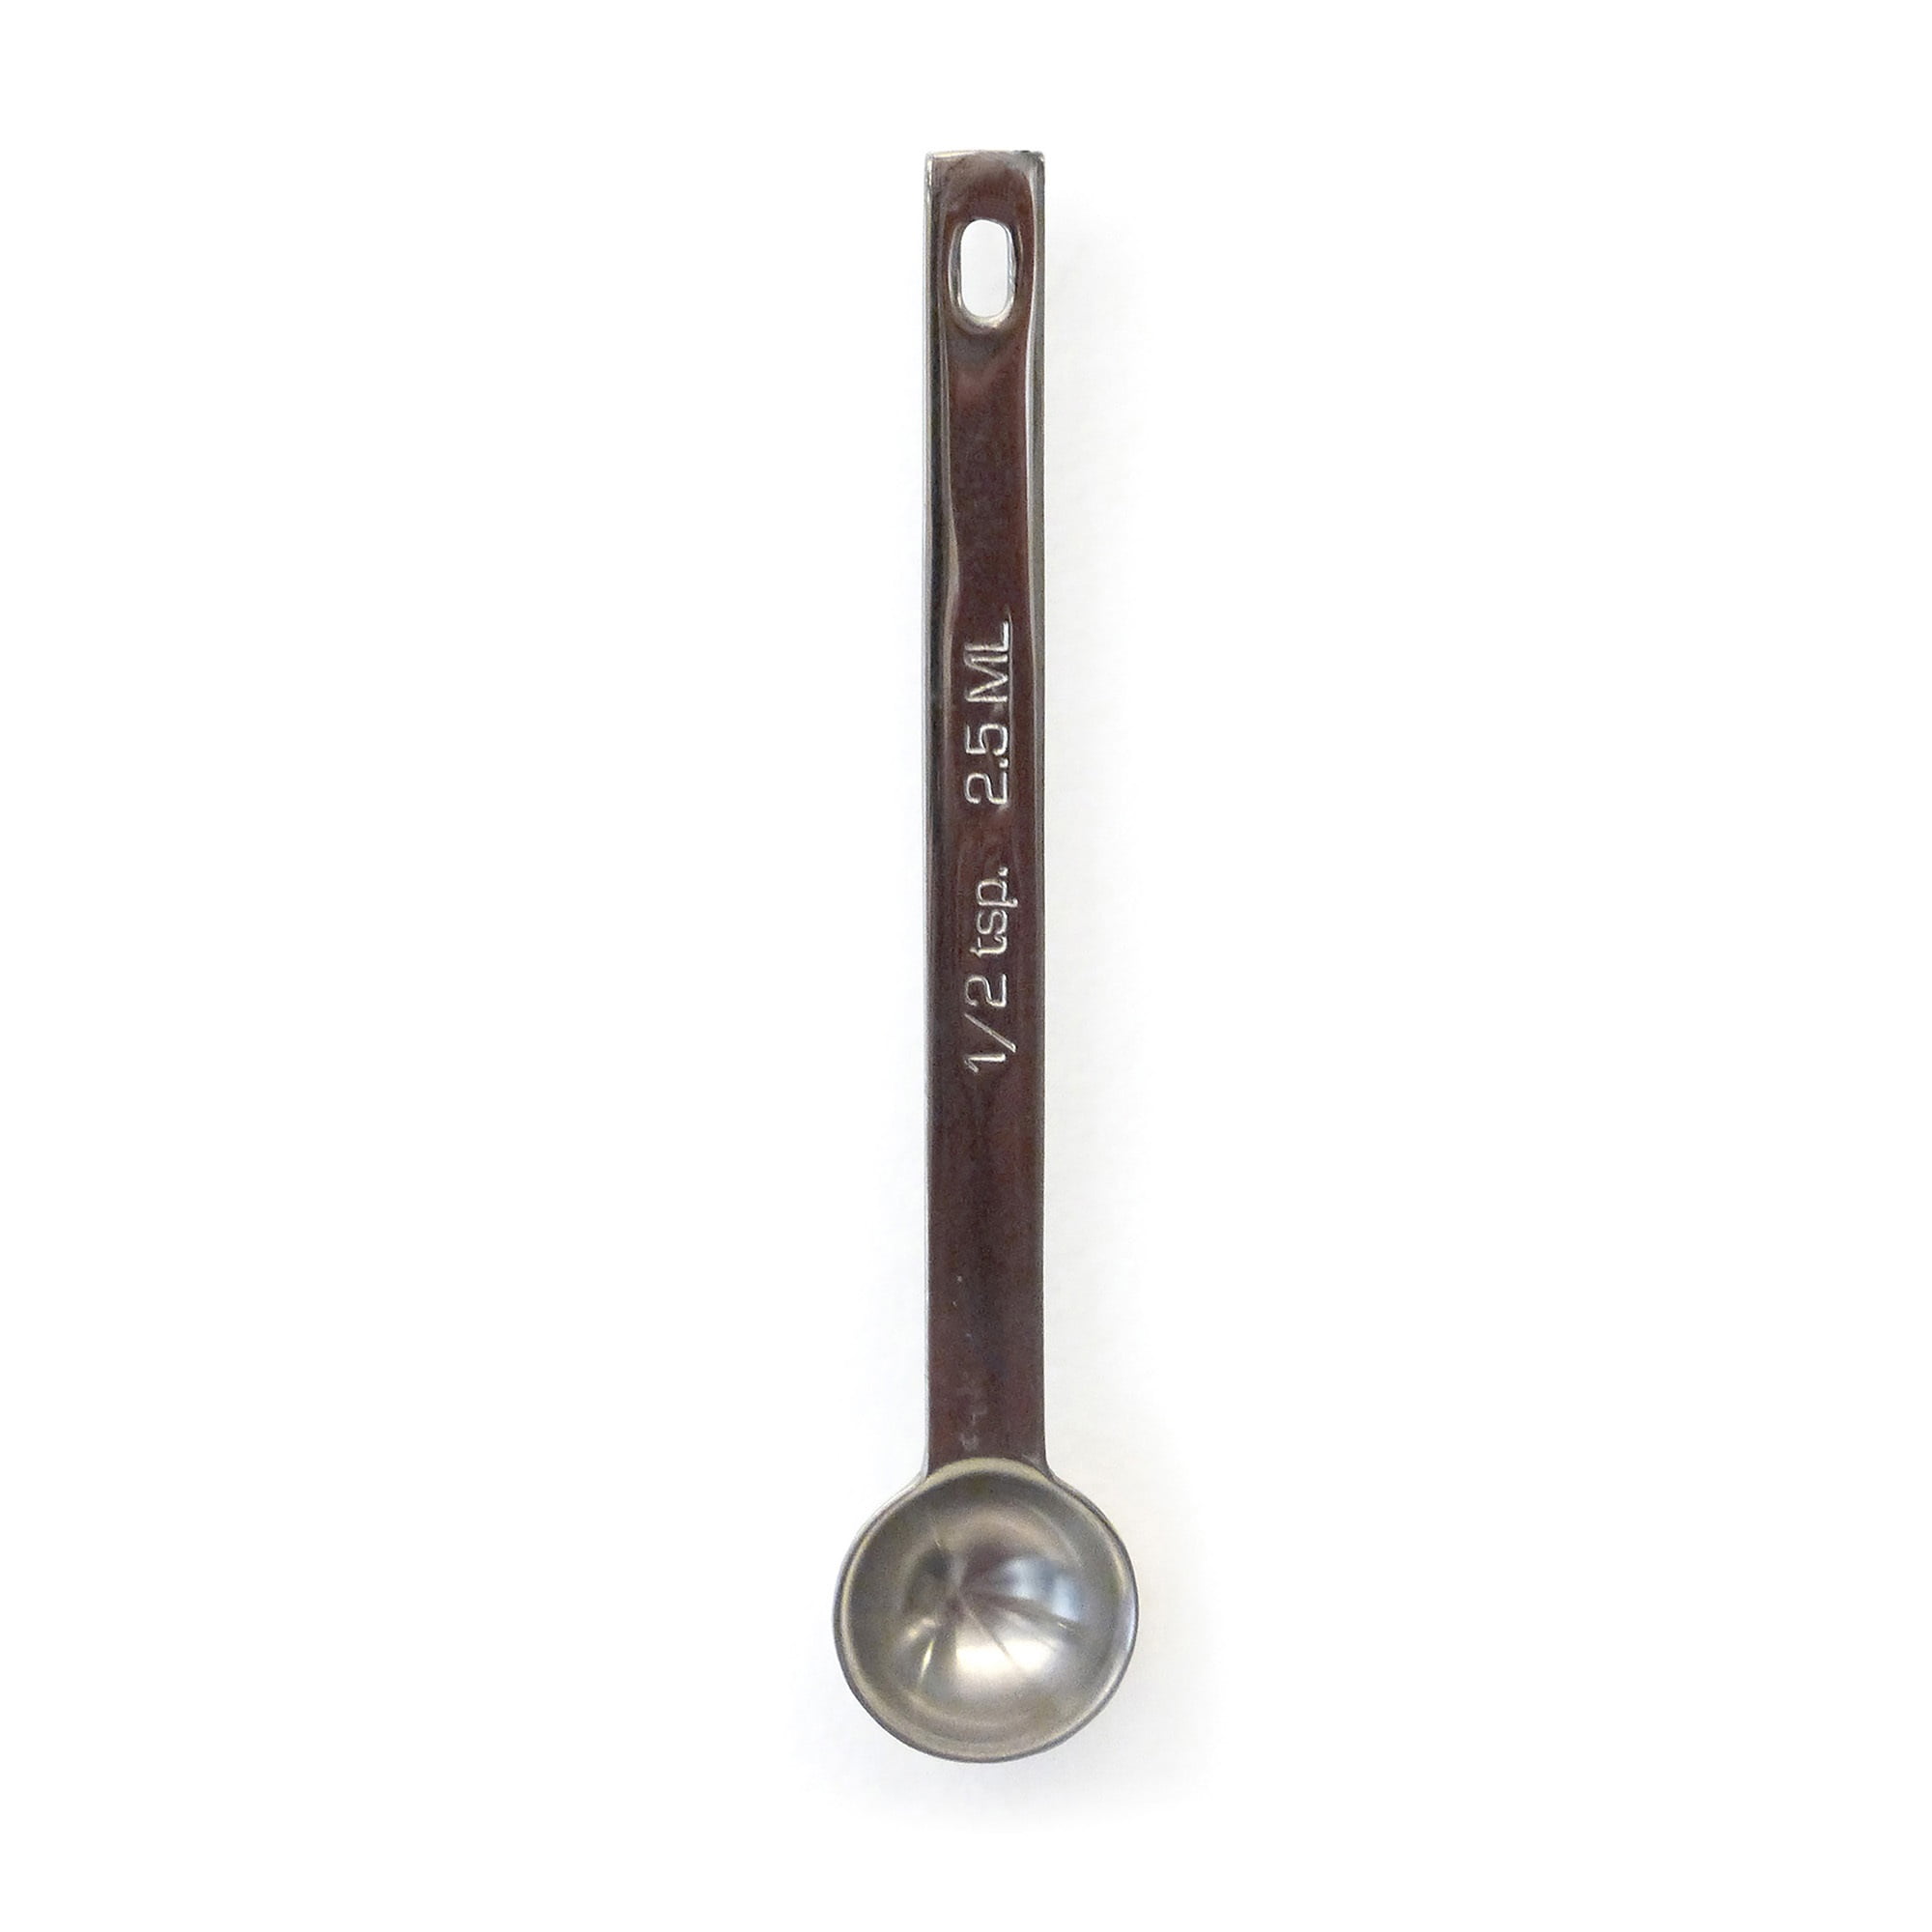 Pewter Cat Family Measuring Spoons - Set of 4 - Bed Bath & Beyond